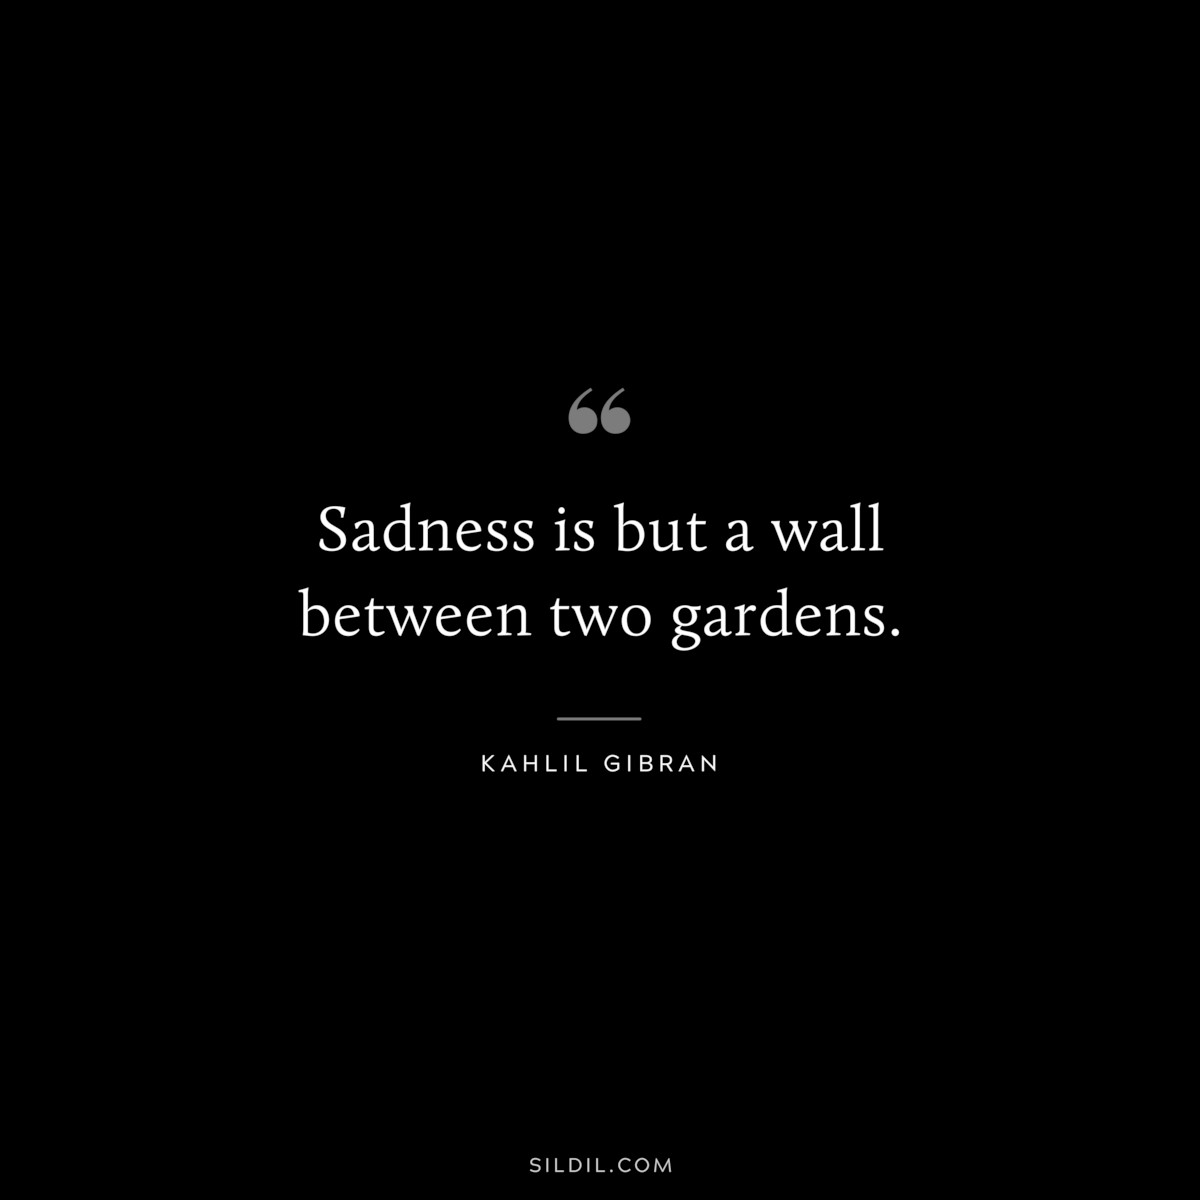 Sadness is but a wall between two gardens. ― Kahlil Gibran